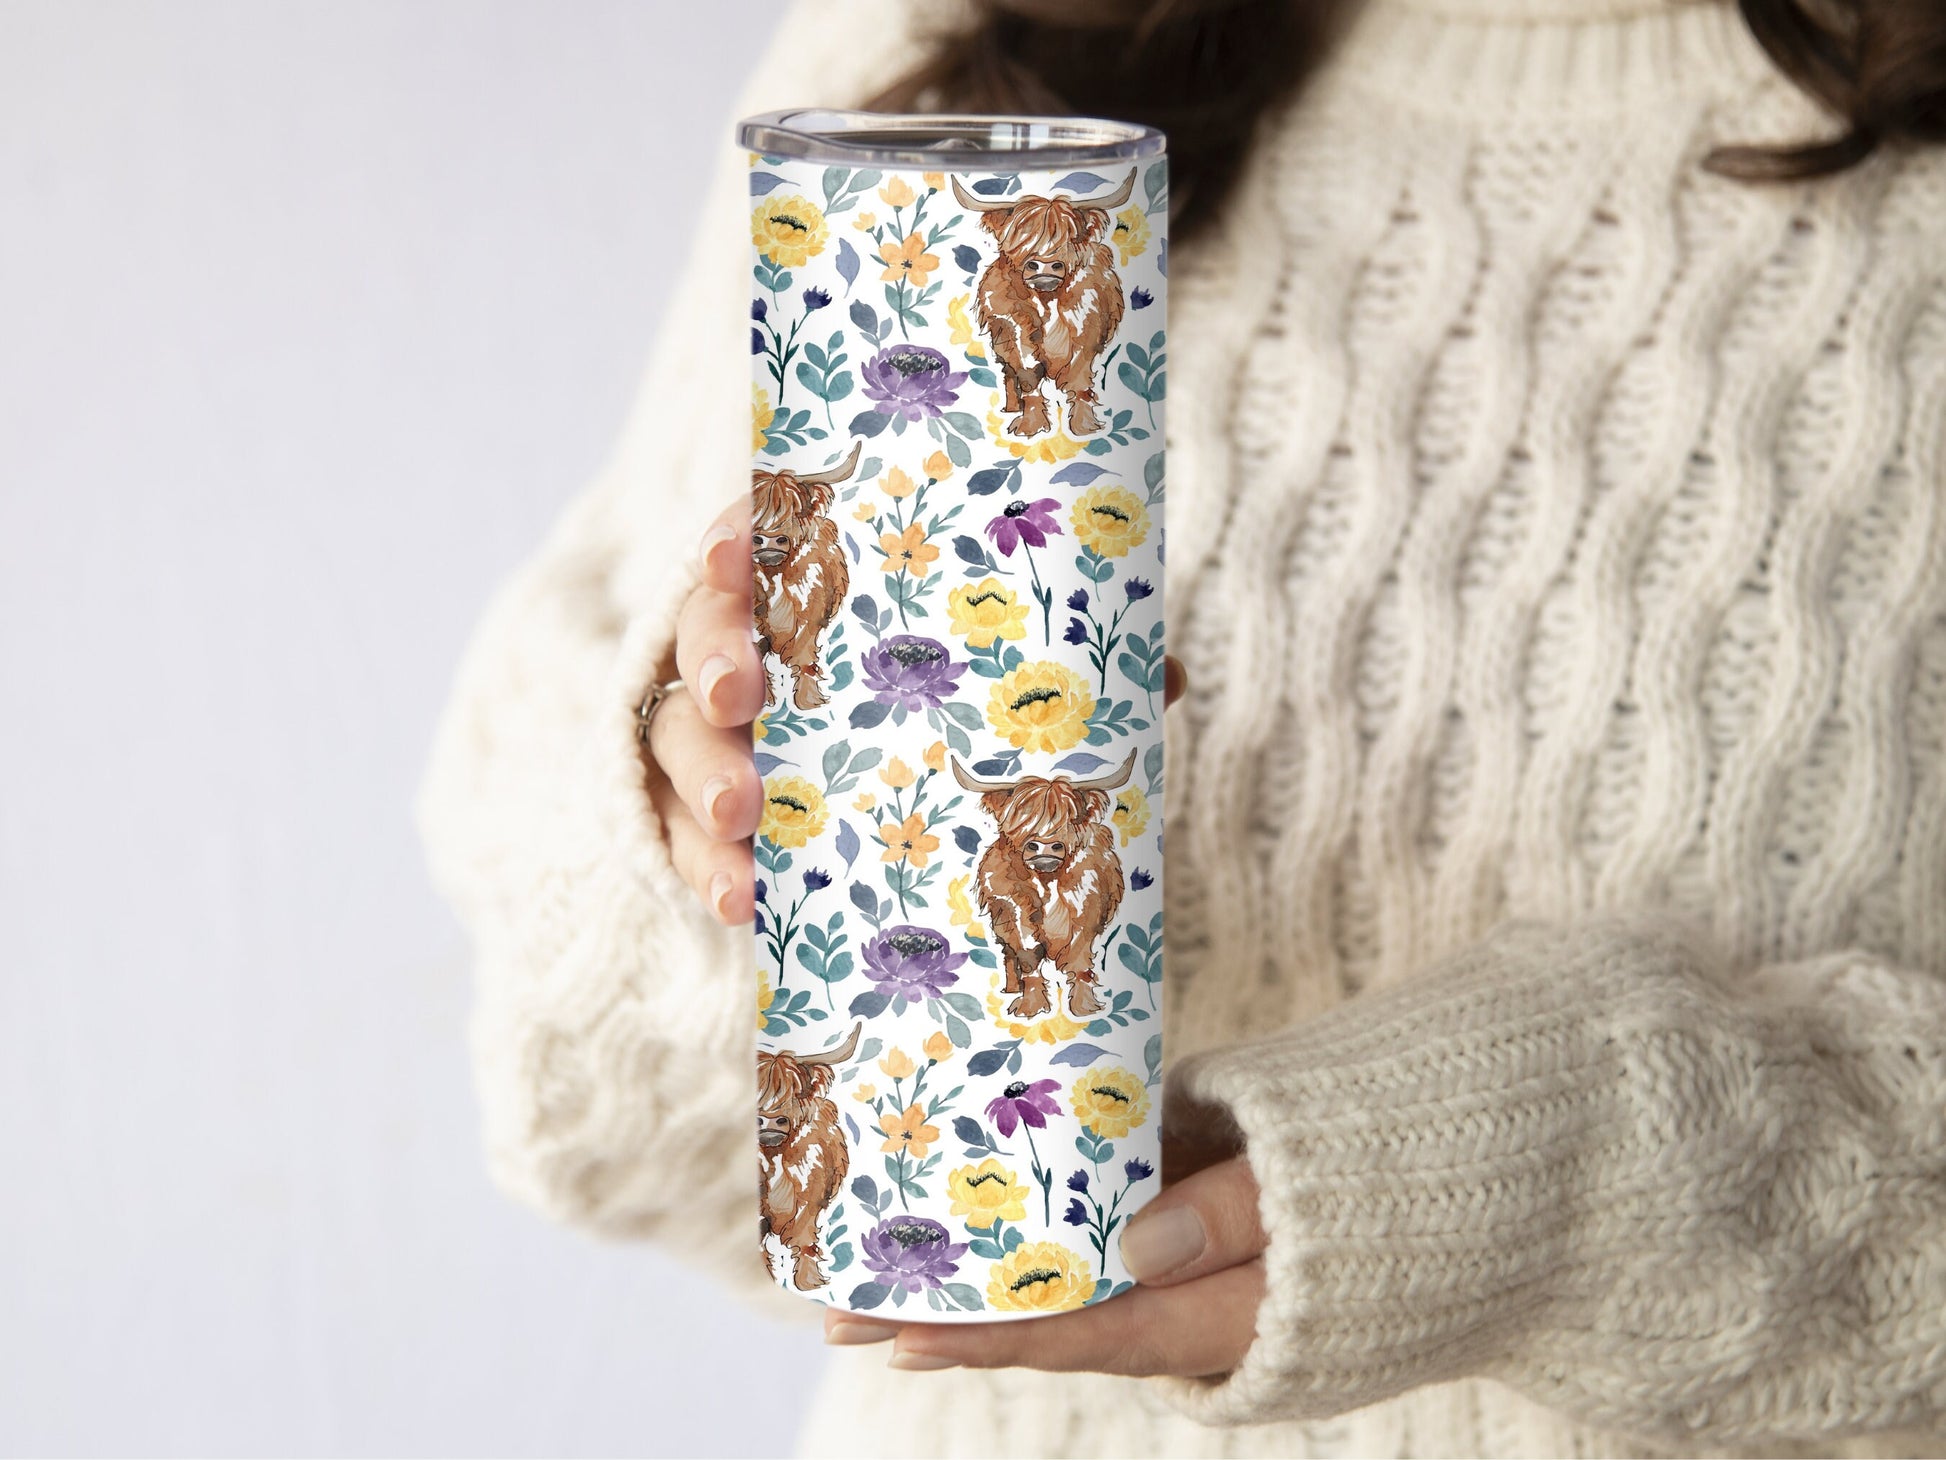 highland cow tumbler, country tumbler cup, country gifts for women, southern tumbler, farm animals, highland cow gift ideas, gifts for girl